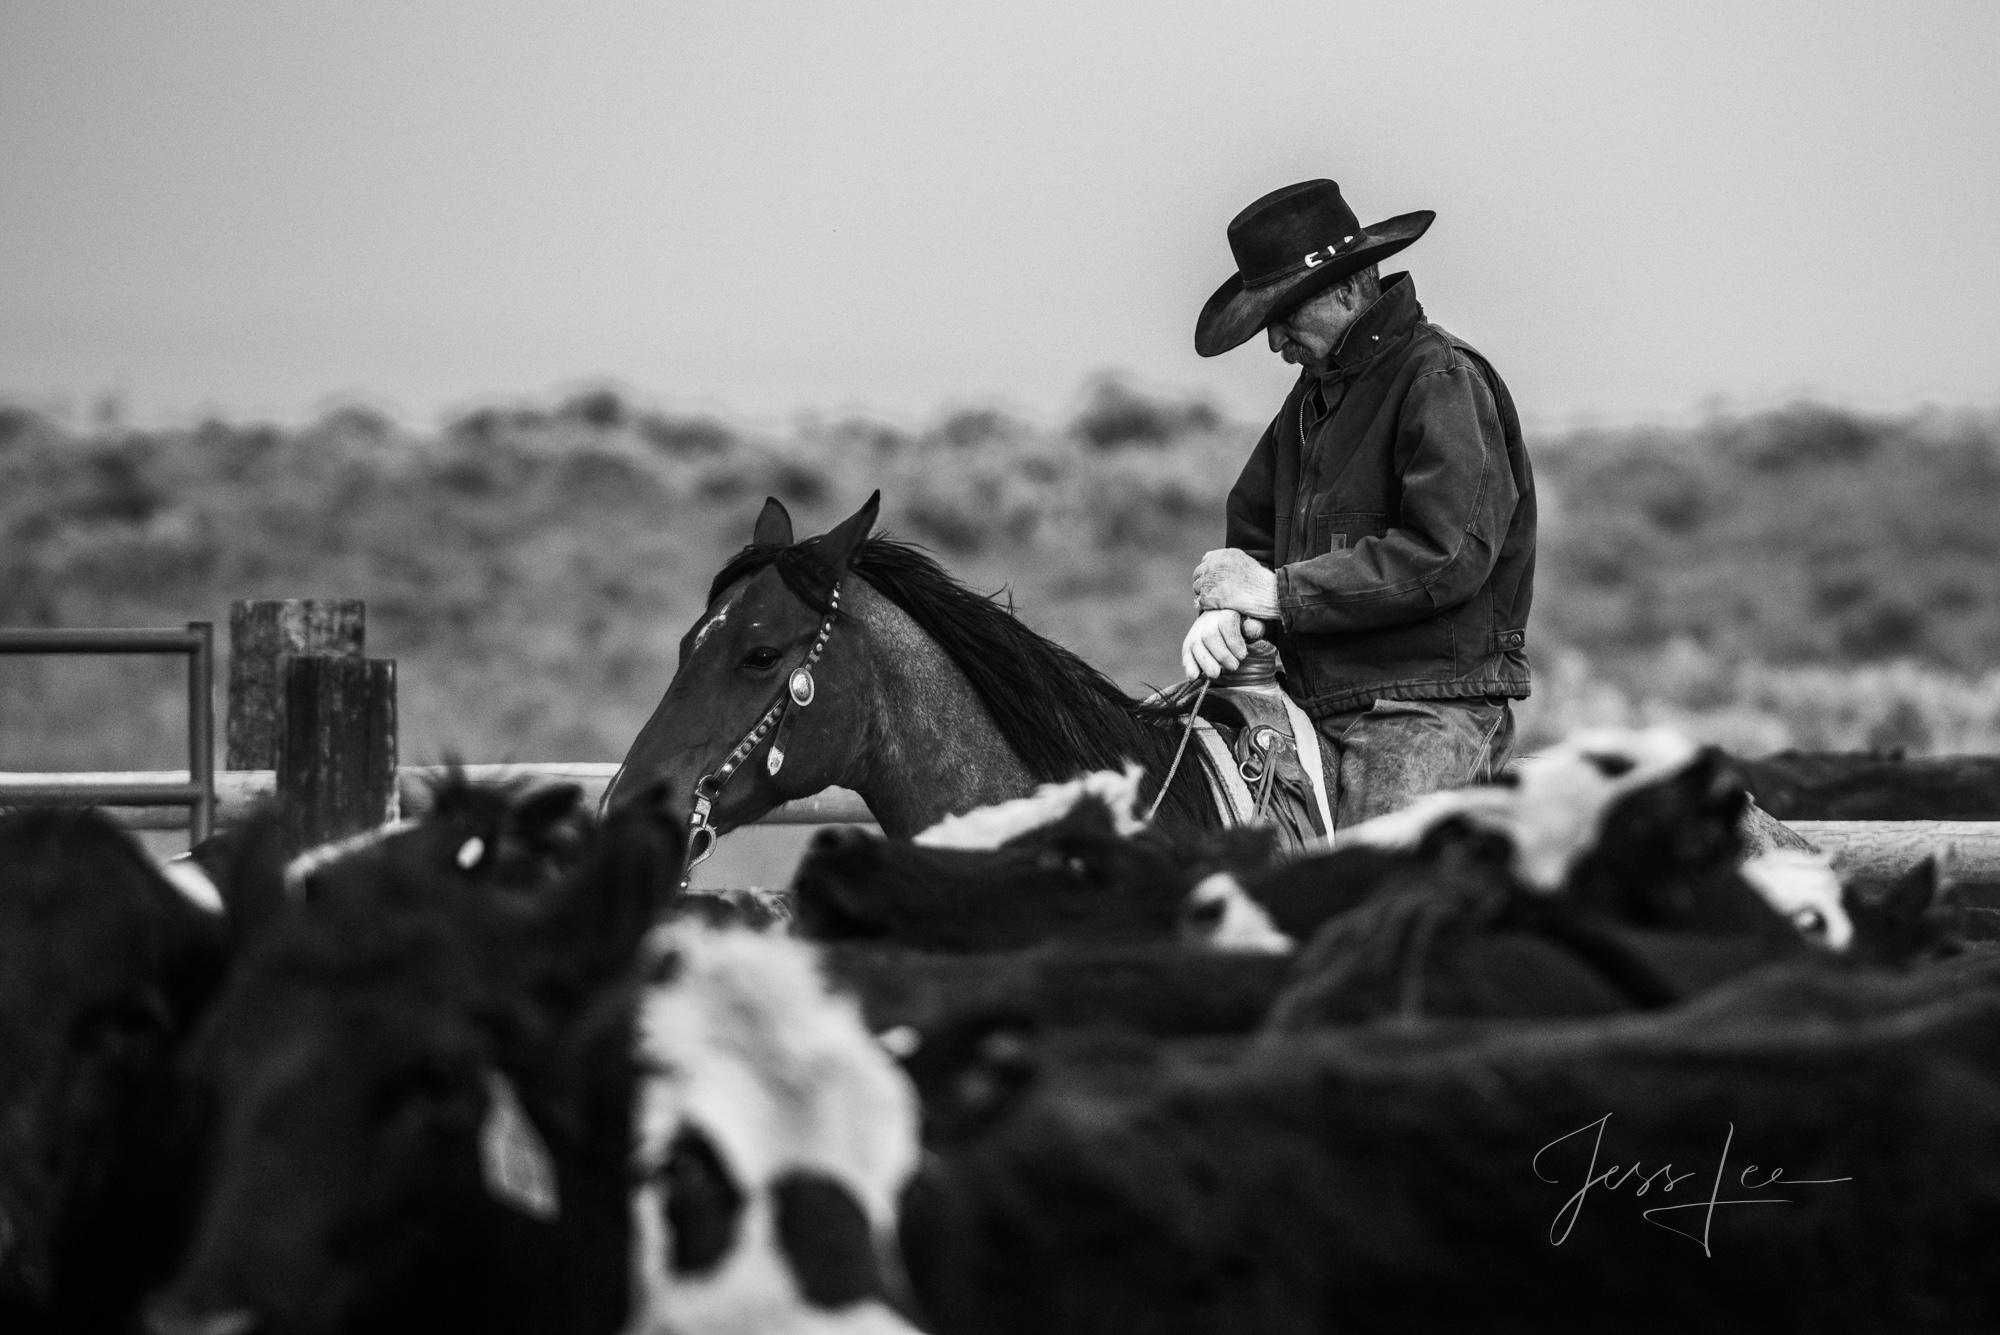 Fine Art Limited Edition Photo Prints of Cowboys, Horses, and life in the West.  Cowboy thinking it over pictures in black and...